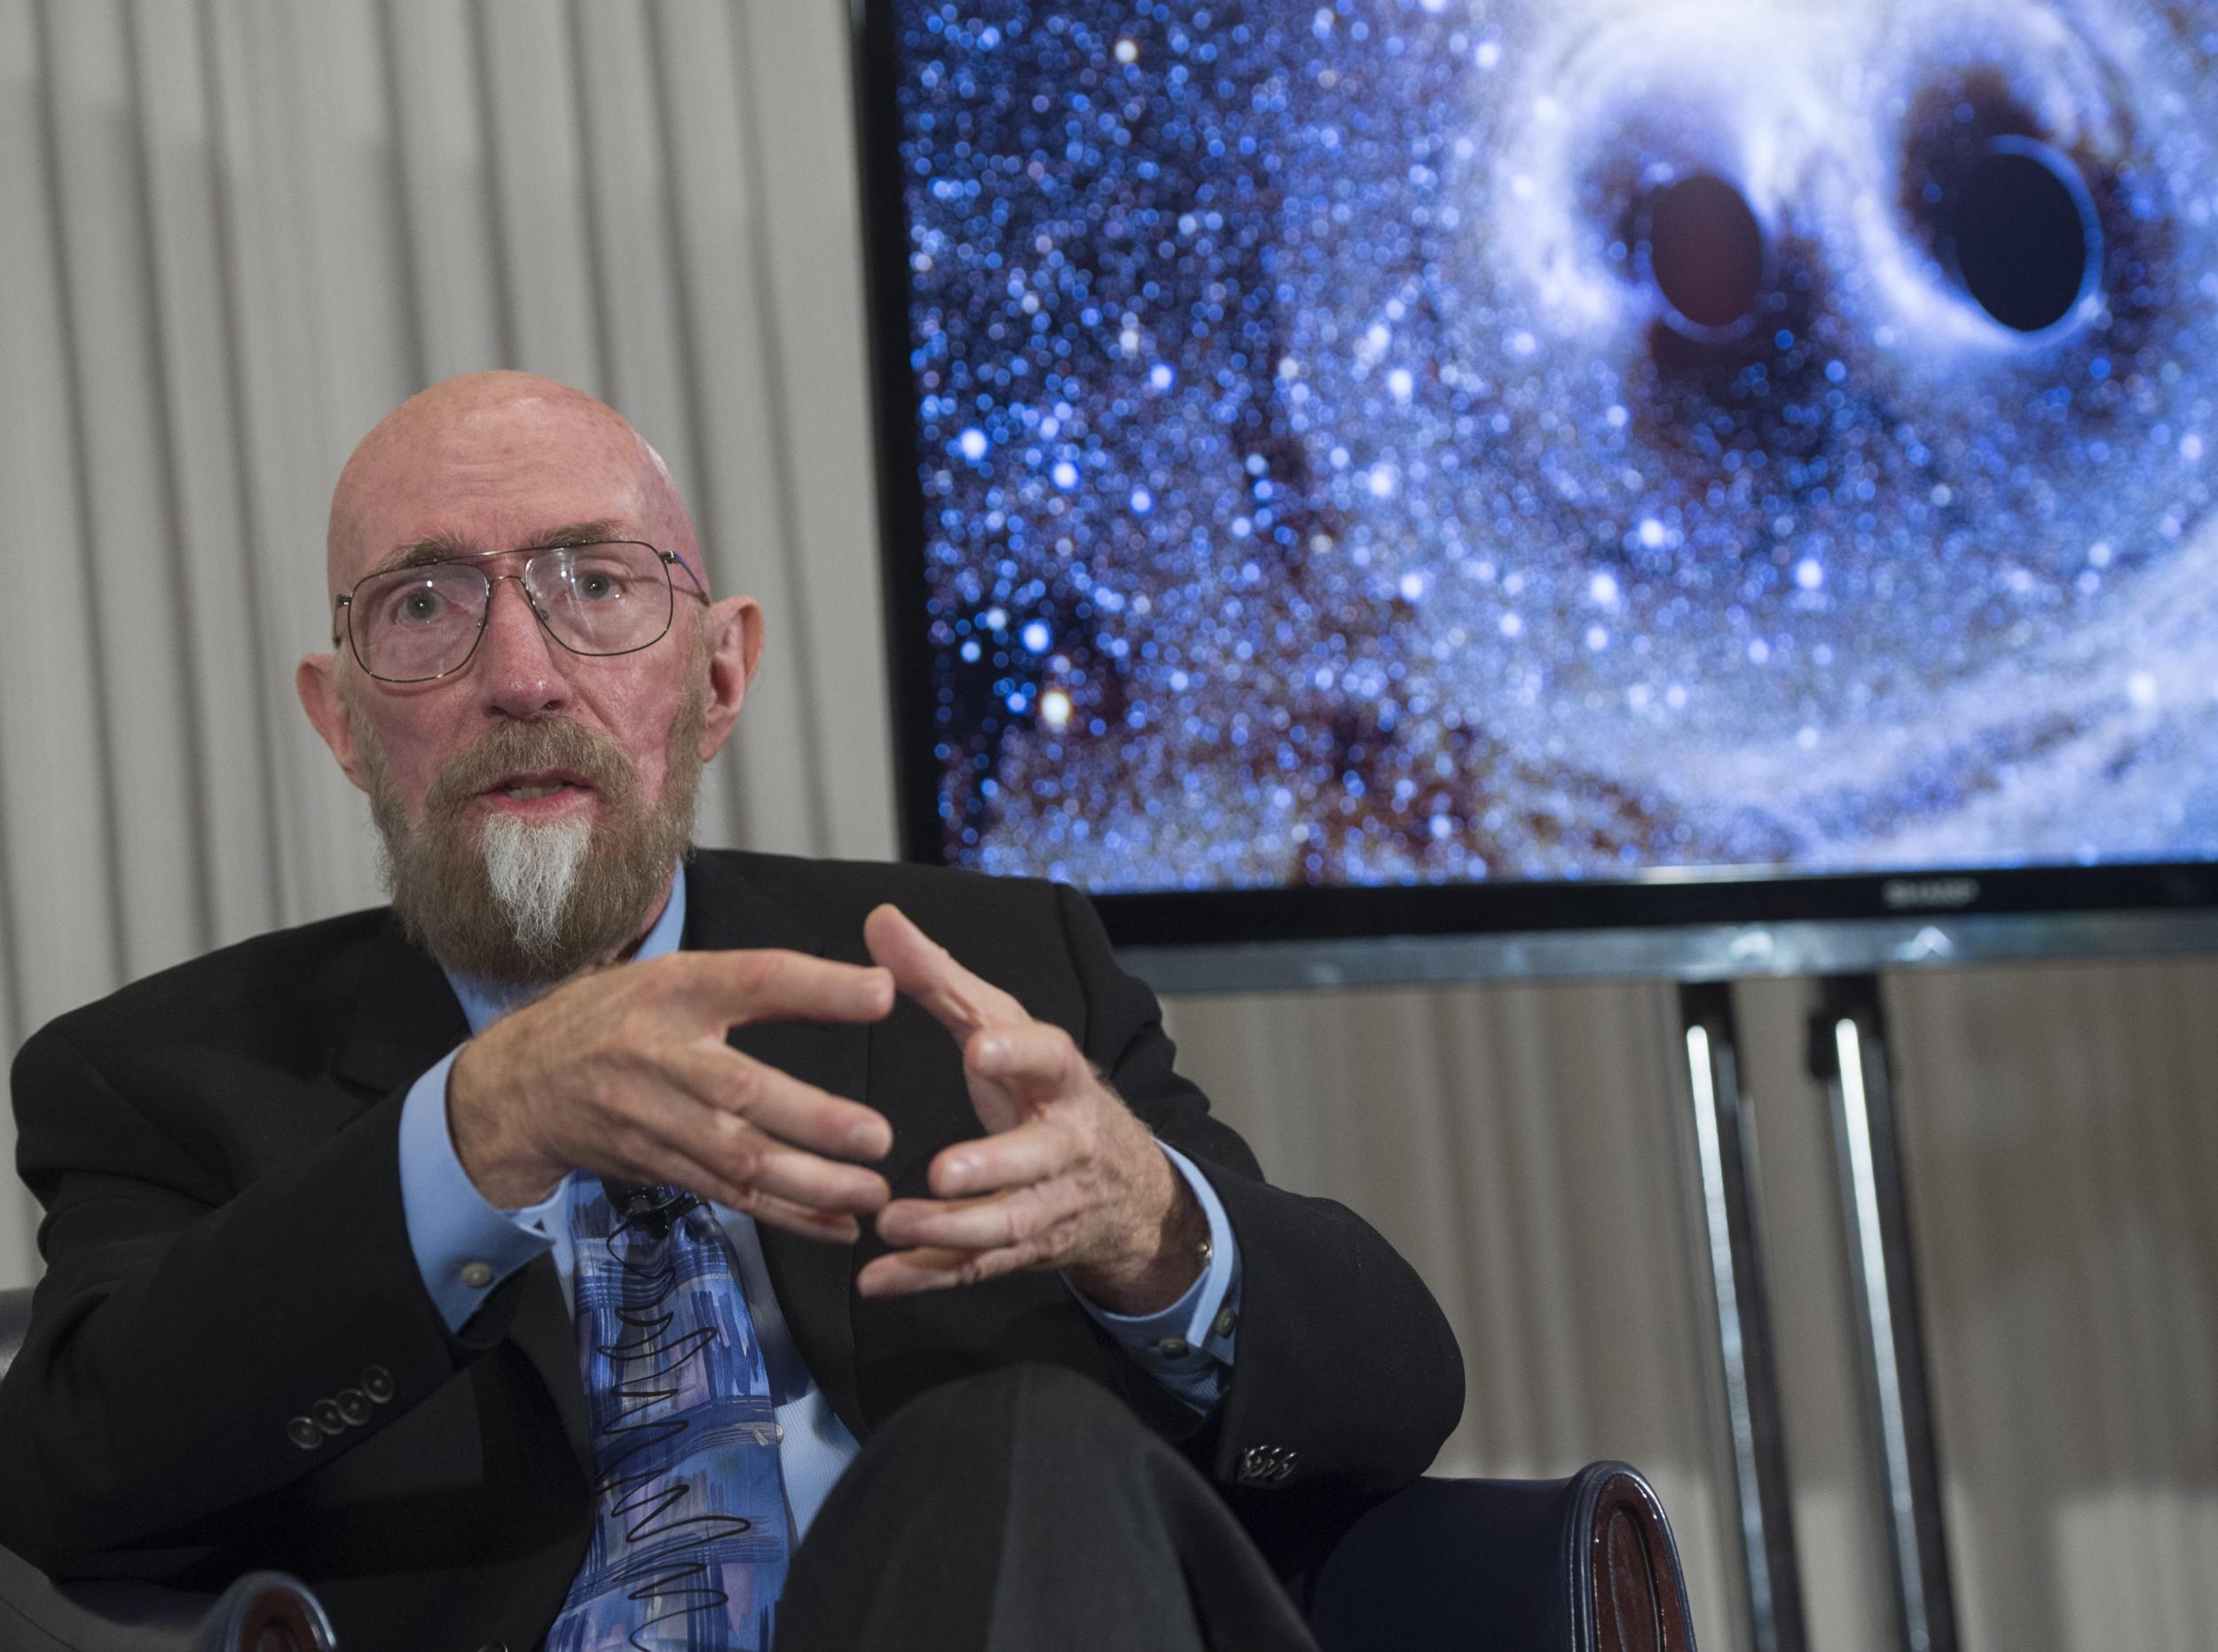 LIGO co-founder Kip Thorne speaks about the discovery of gravitational waves at a Washington, D.C press conference